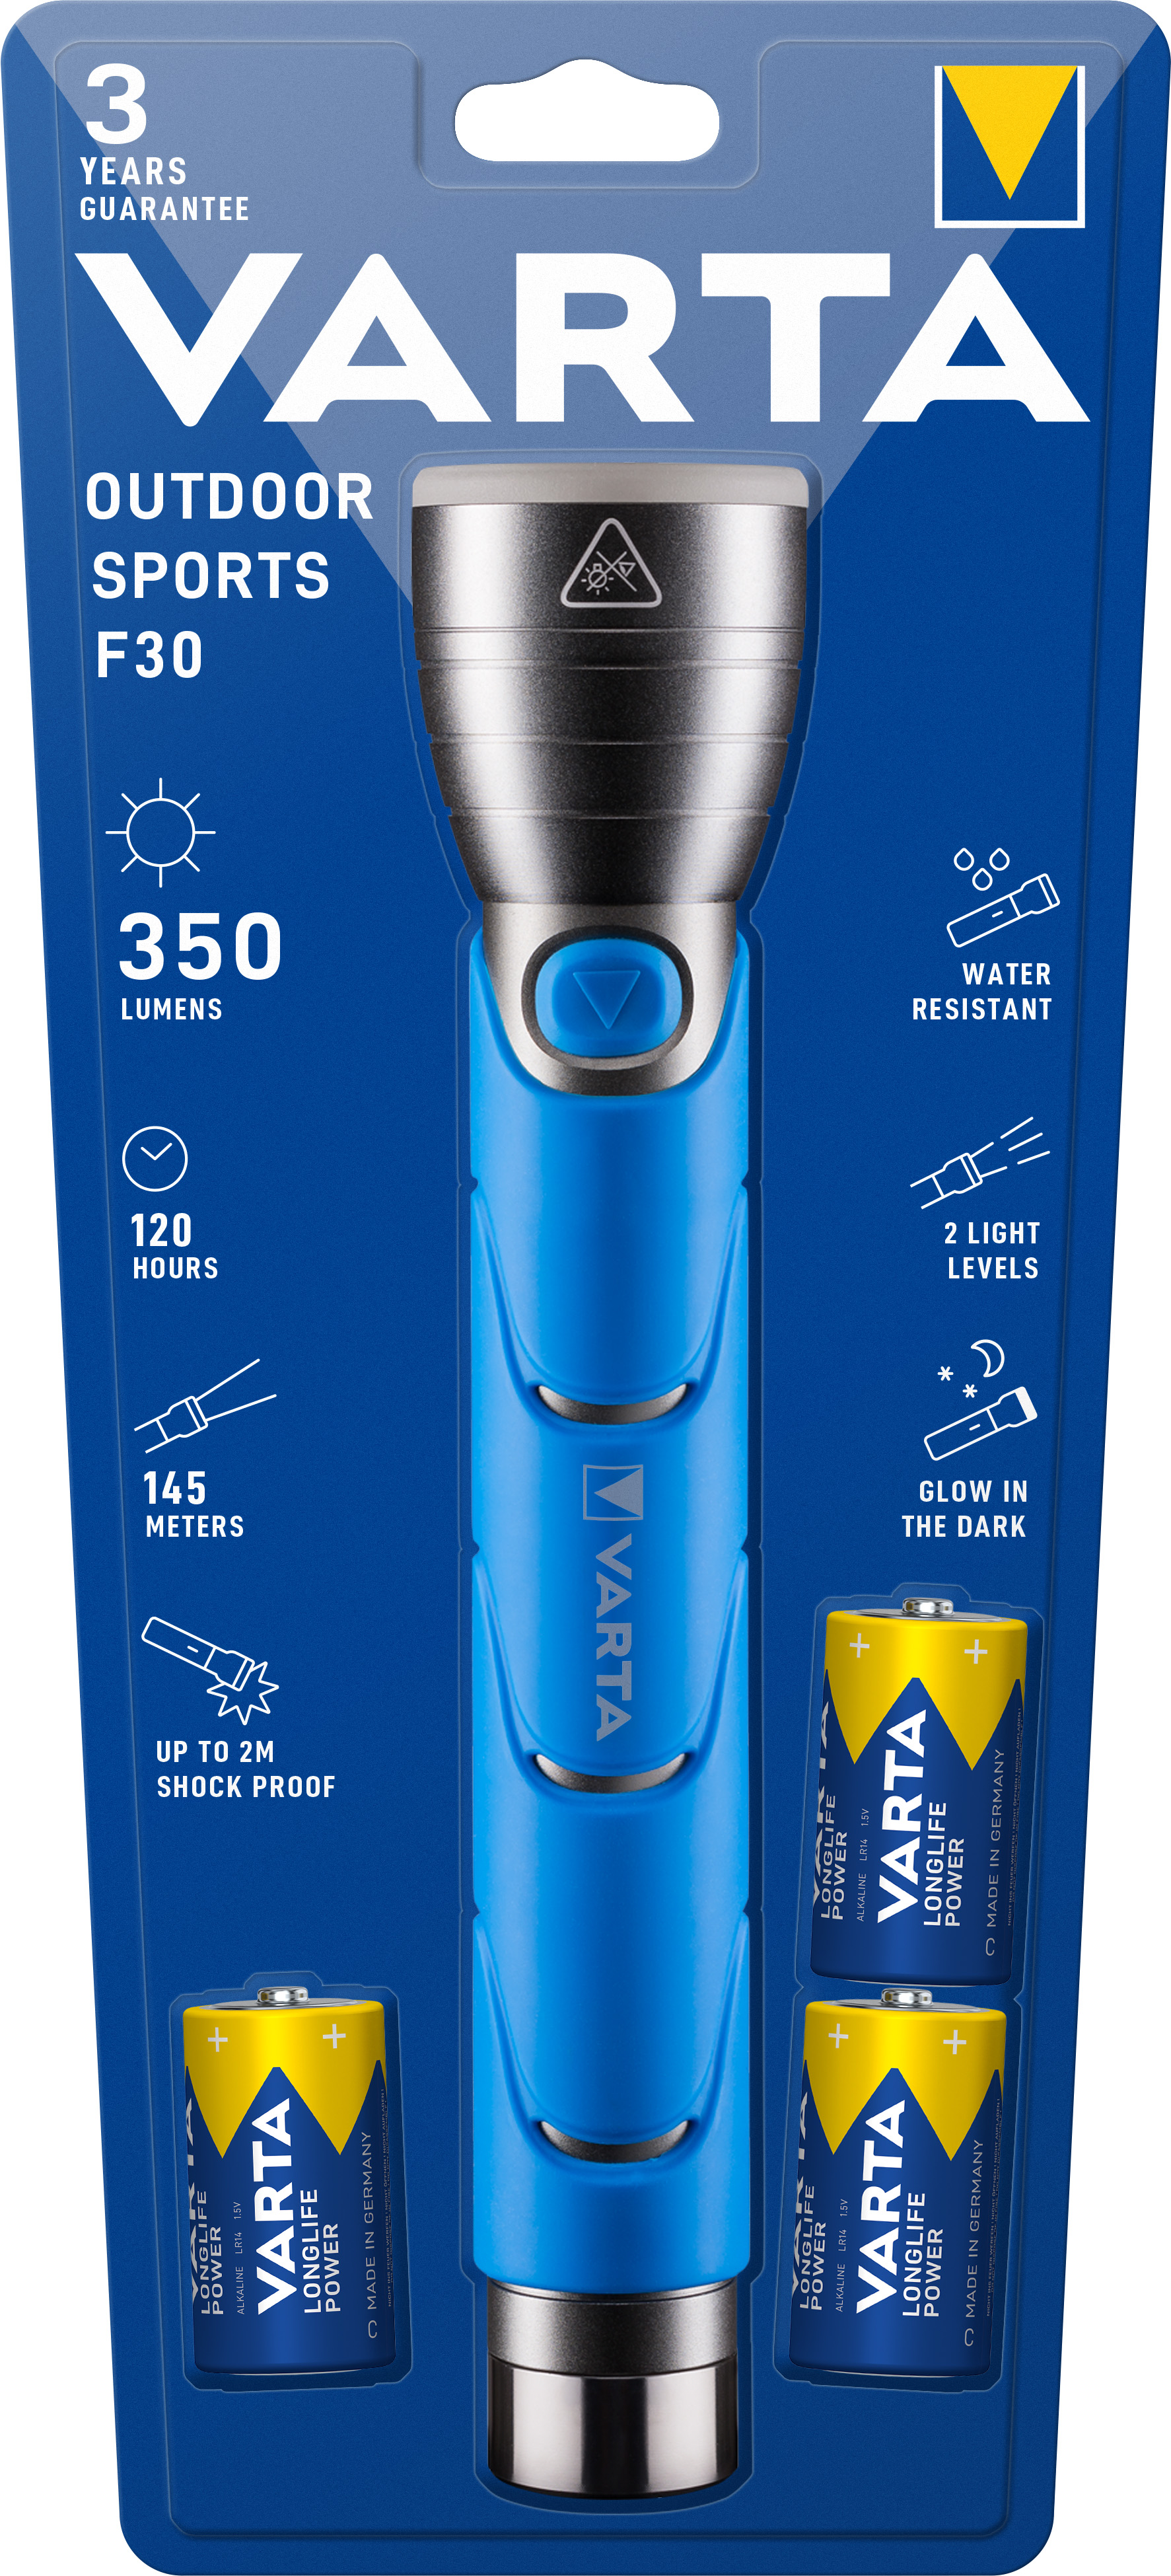 Varta LED Taschenlampe Outdoor Sports, F30 350lm, inkl. 3x Batterie Baby C, Retail Blister